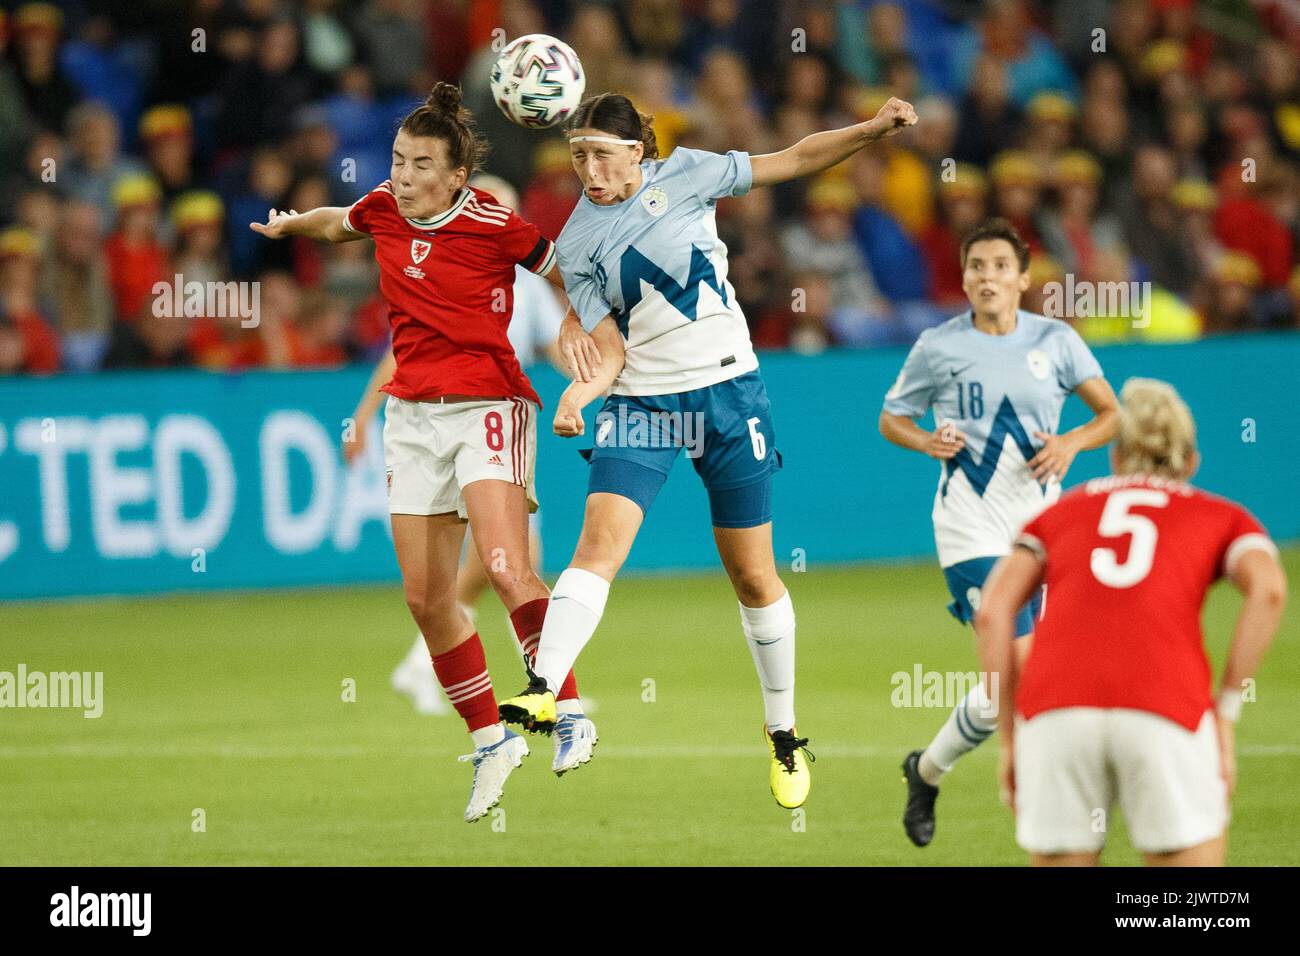 Cardiff, UK. 6th Sep, 2022. Angharad James of Wales and Kaja Korošec of Slovenia go up for a header during the Wales v Slovenia Women's World Cup Qualification match. Credit: Gruffydd Thomas/Alamy Live News Stock Photo